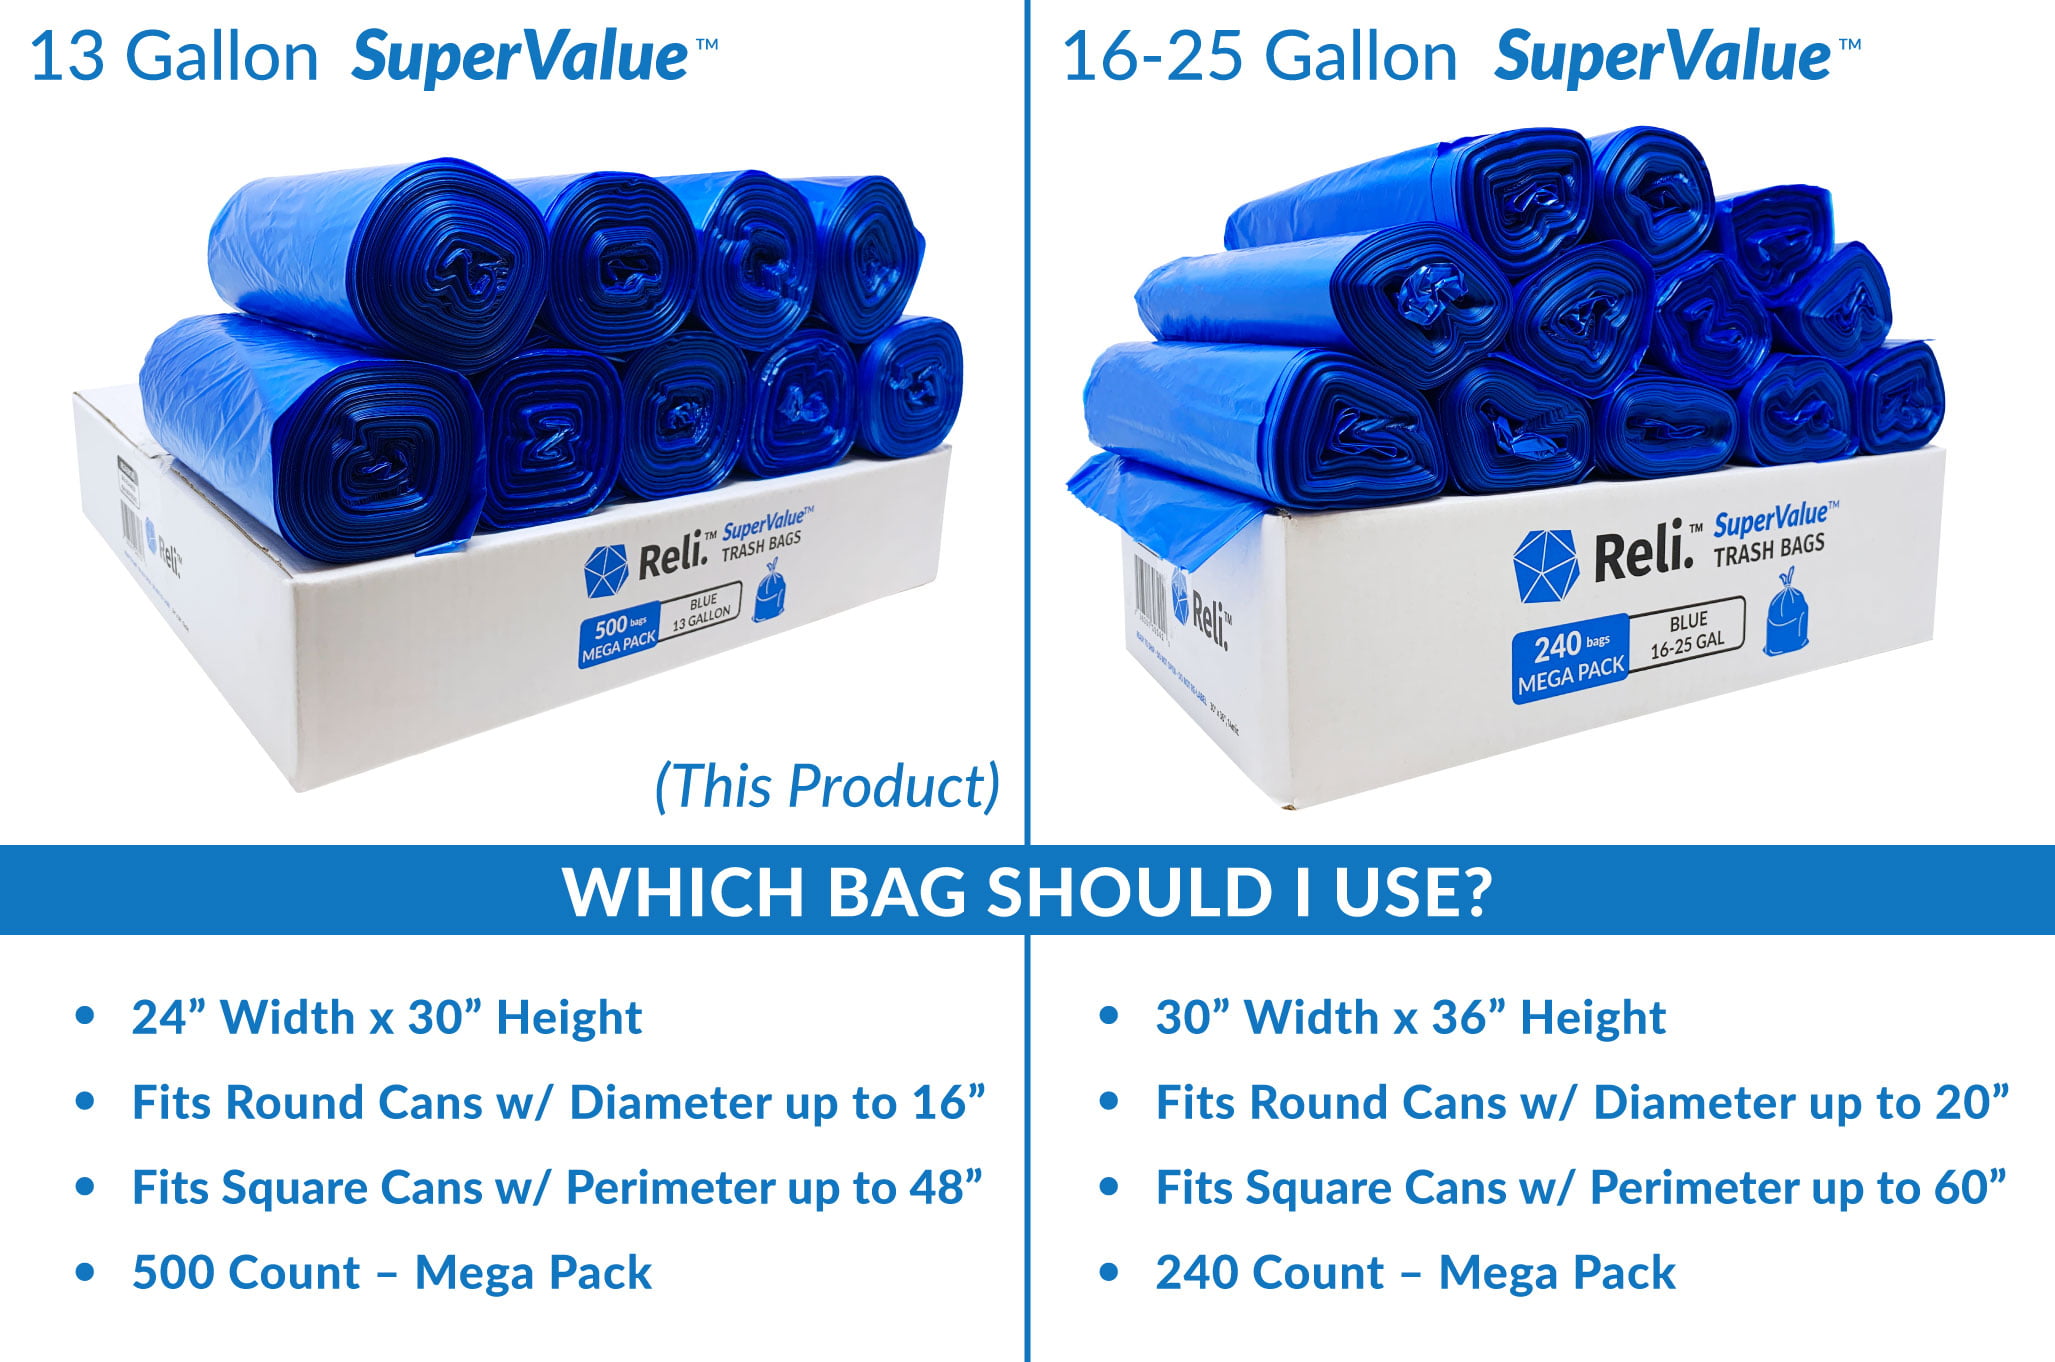 SuperValue 13 Gallon Recycling Bags Reli Tall 500 Count Bulk Blue Trash Bags 